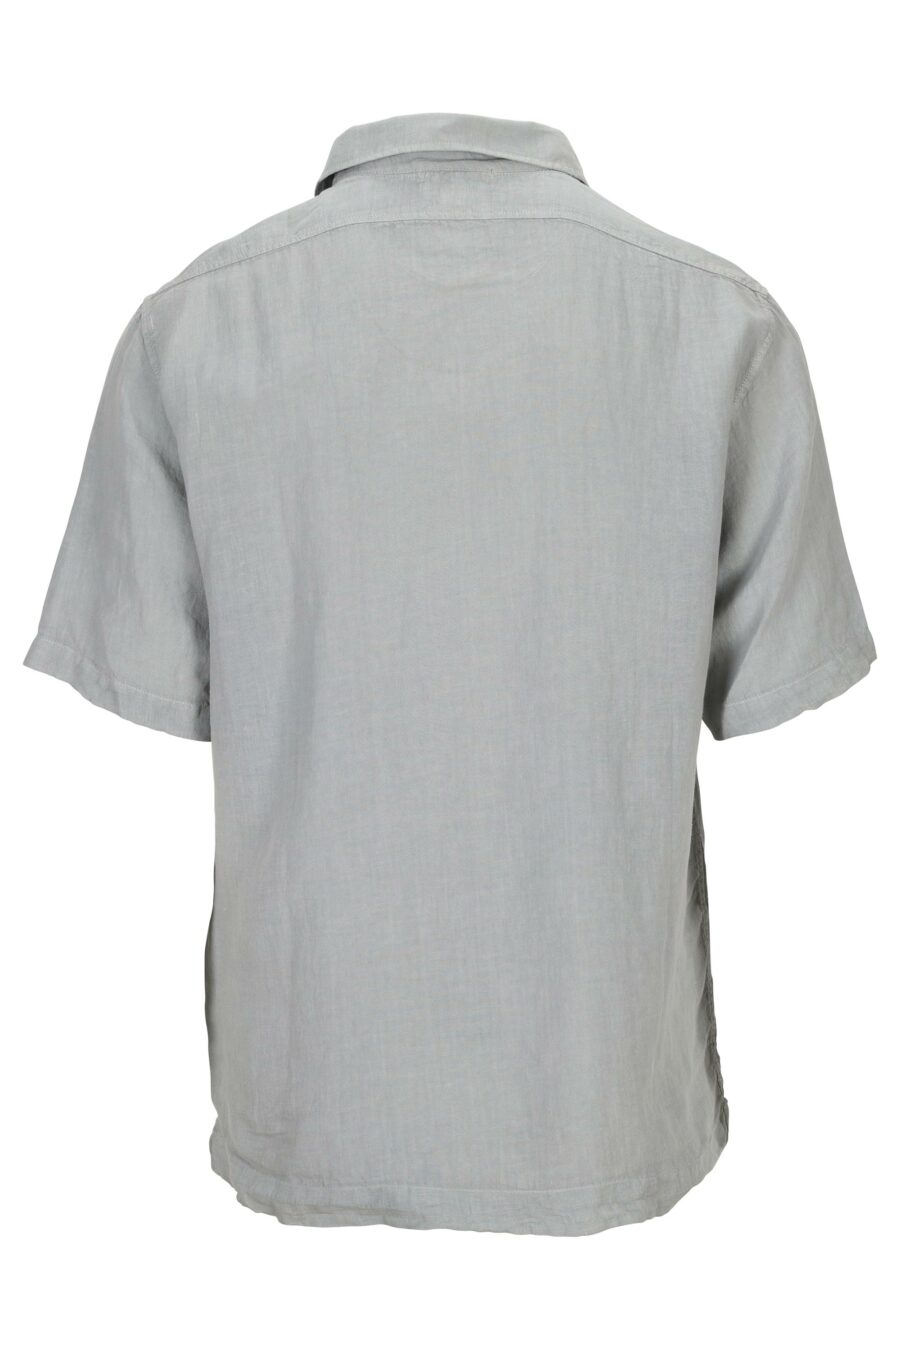 Short sleeve grey shirt with buttons and pockets with mini-logo - 7620943668773 1